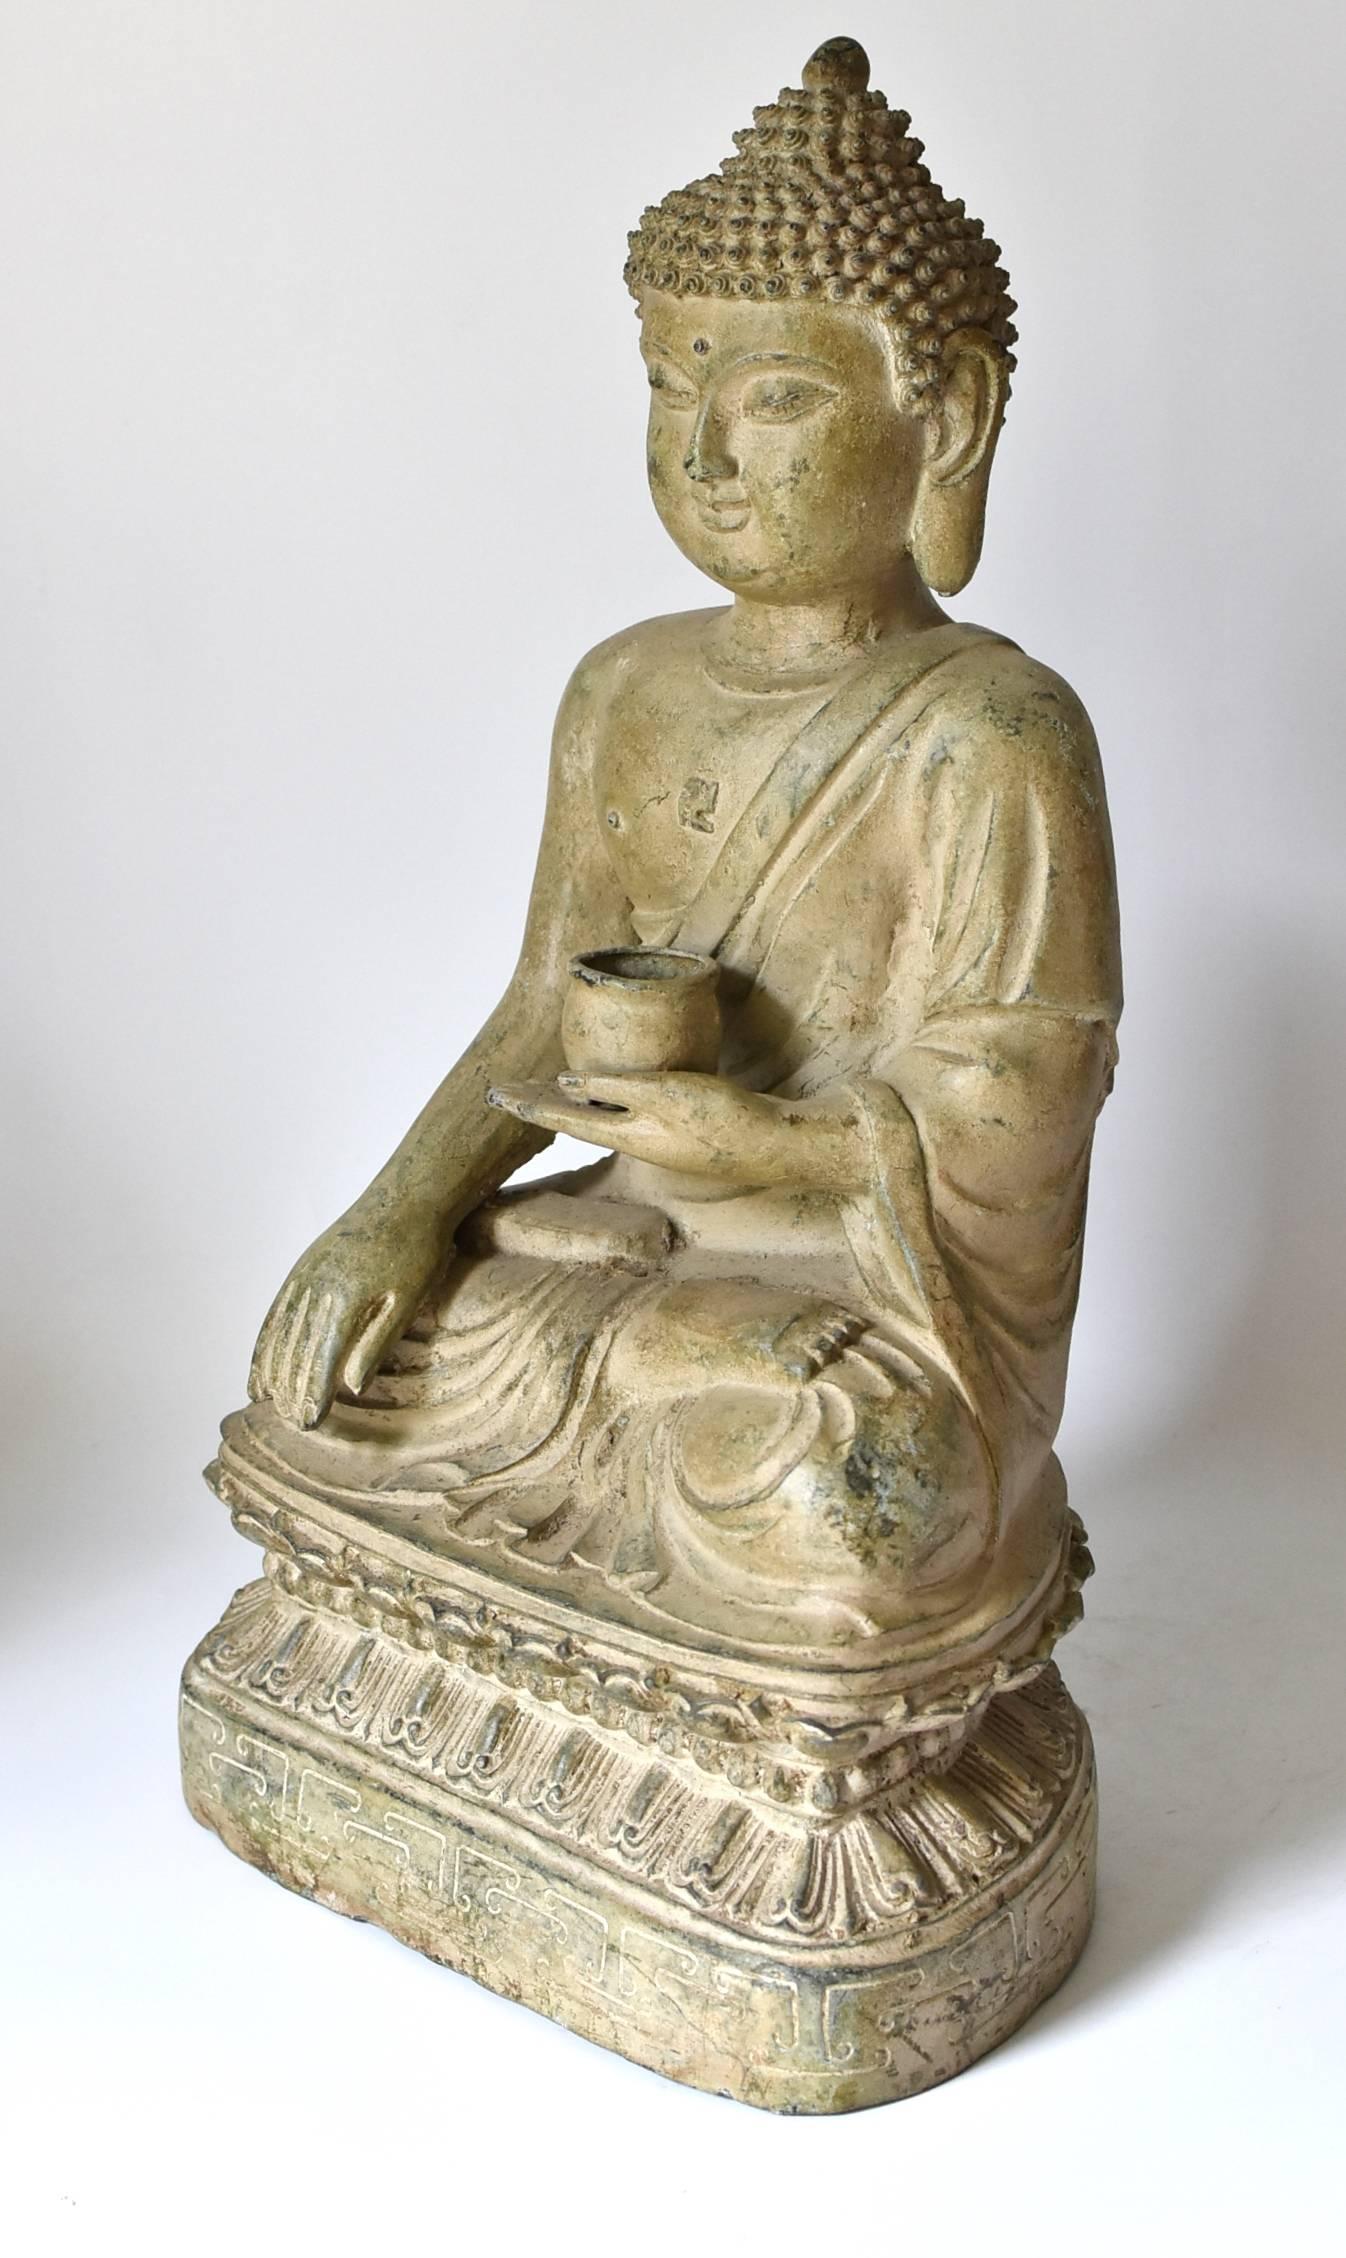 A beautiful pale green bronze sitting Buddha statue. The style of the piece is of the Tang dynasty era, with a full face, long ear lobes and scrolled hair style. Beautiful, finely defined facial features convey a sense of calm and serenity. Buddha